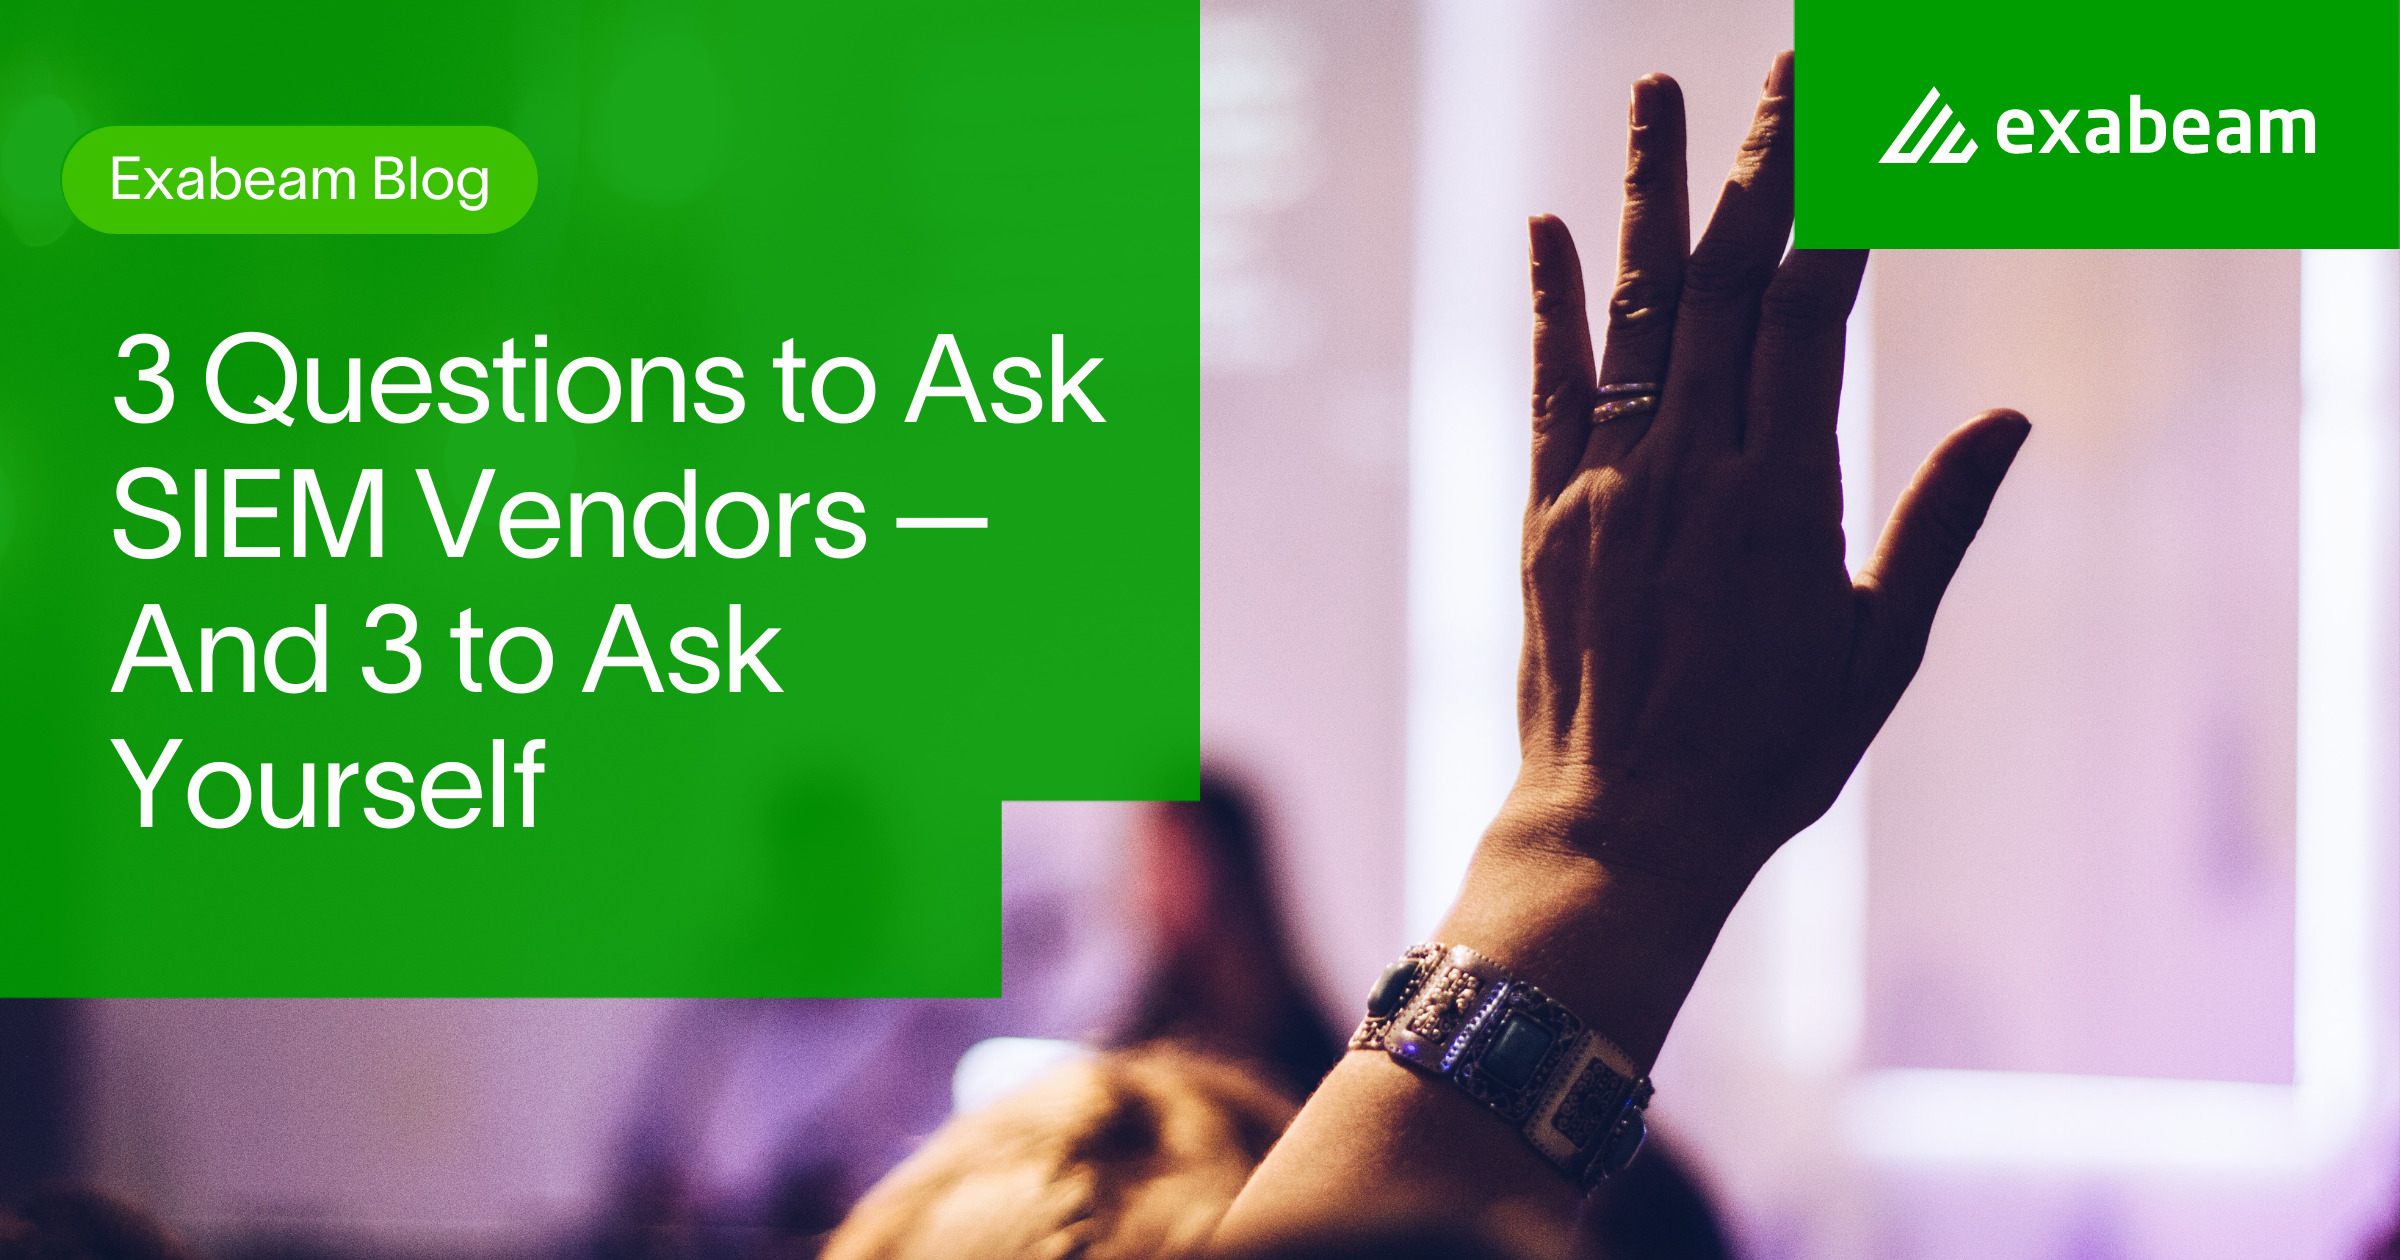 3 Questions to Ask SIEM Vendors — And 3 to Ask Yourself